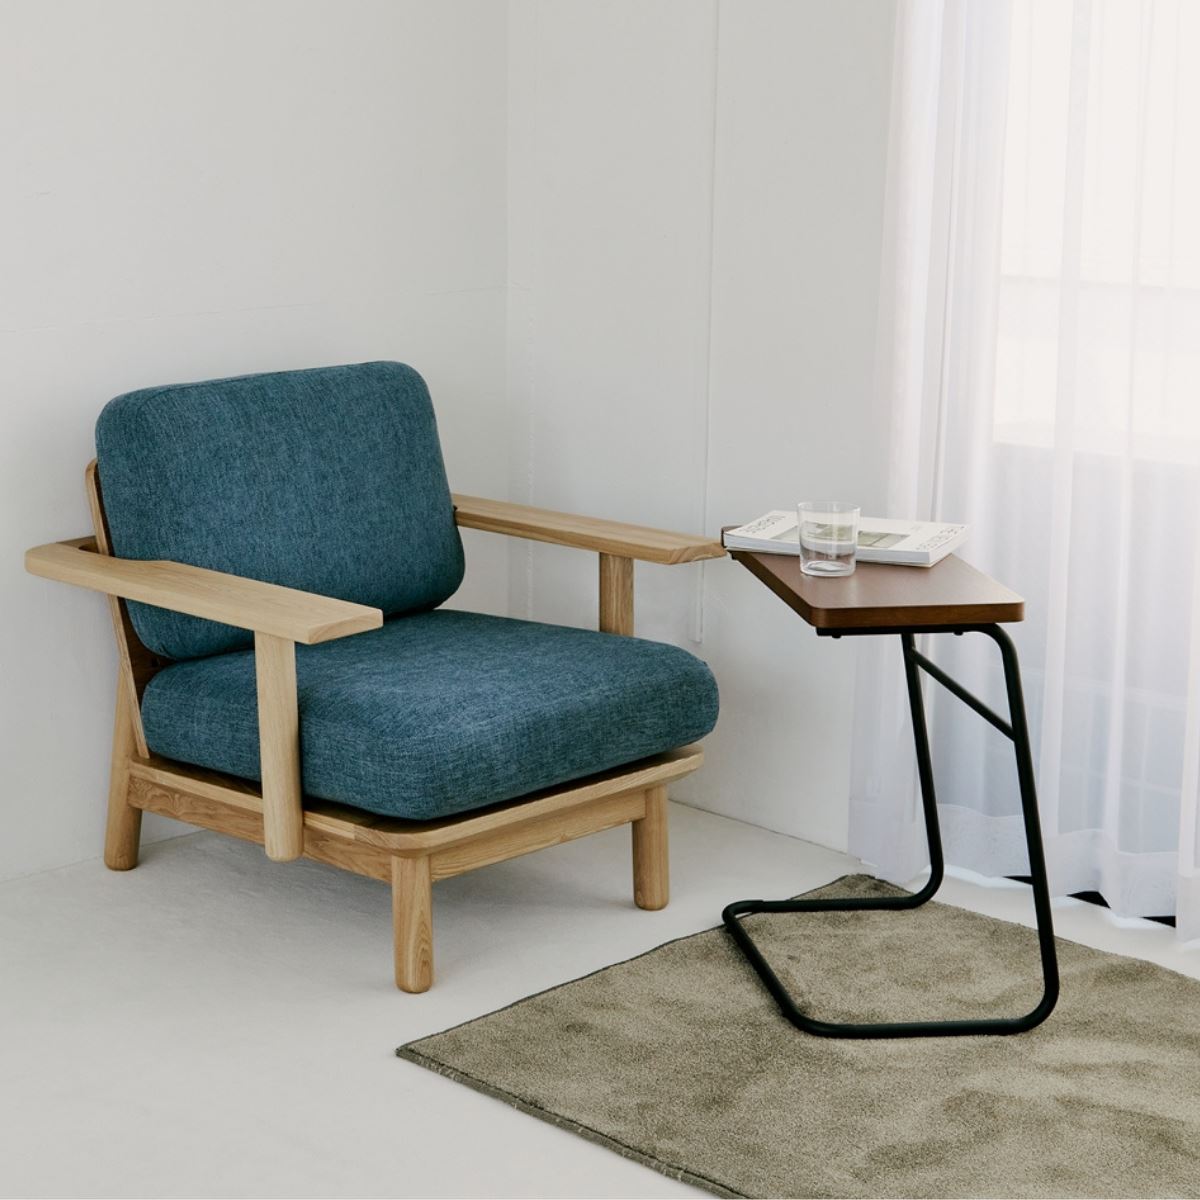 KUUM  Sofa 1 seater Double arm - Wooden Frame/Natural / クーム ソファ